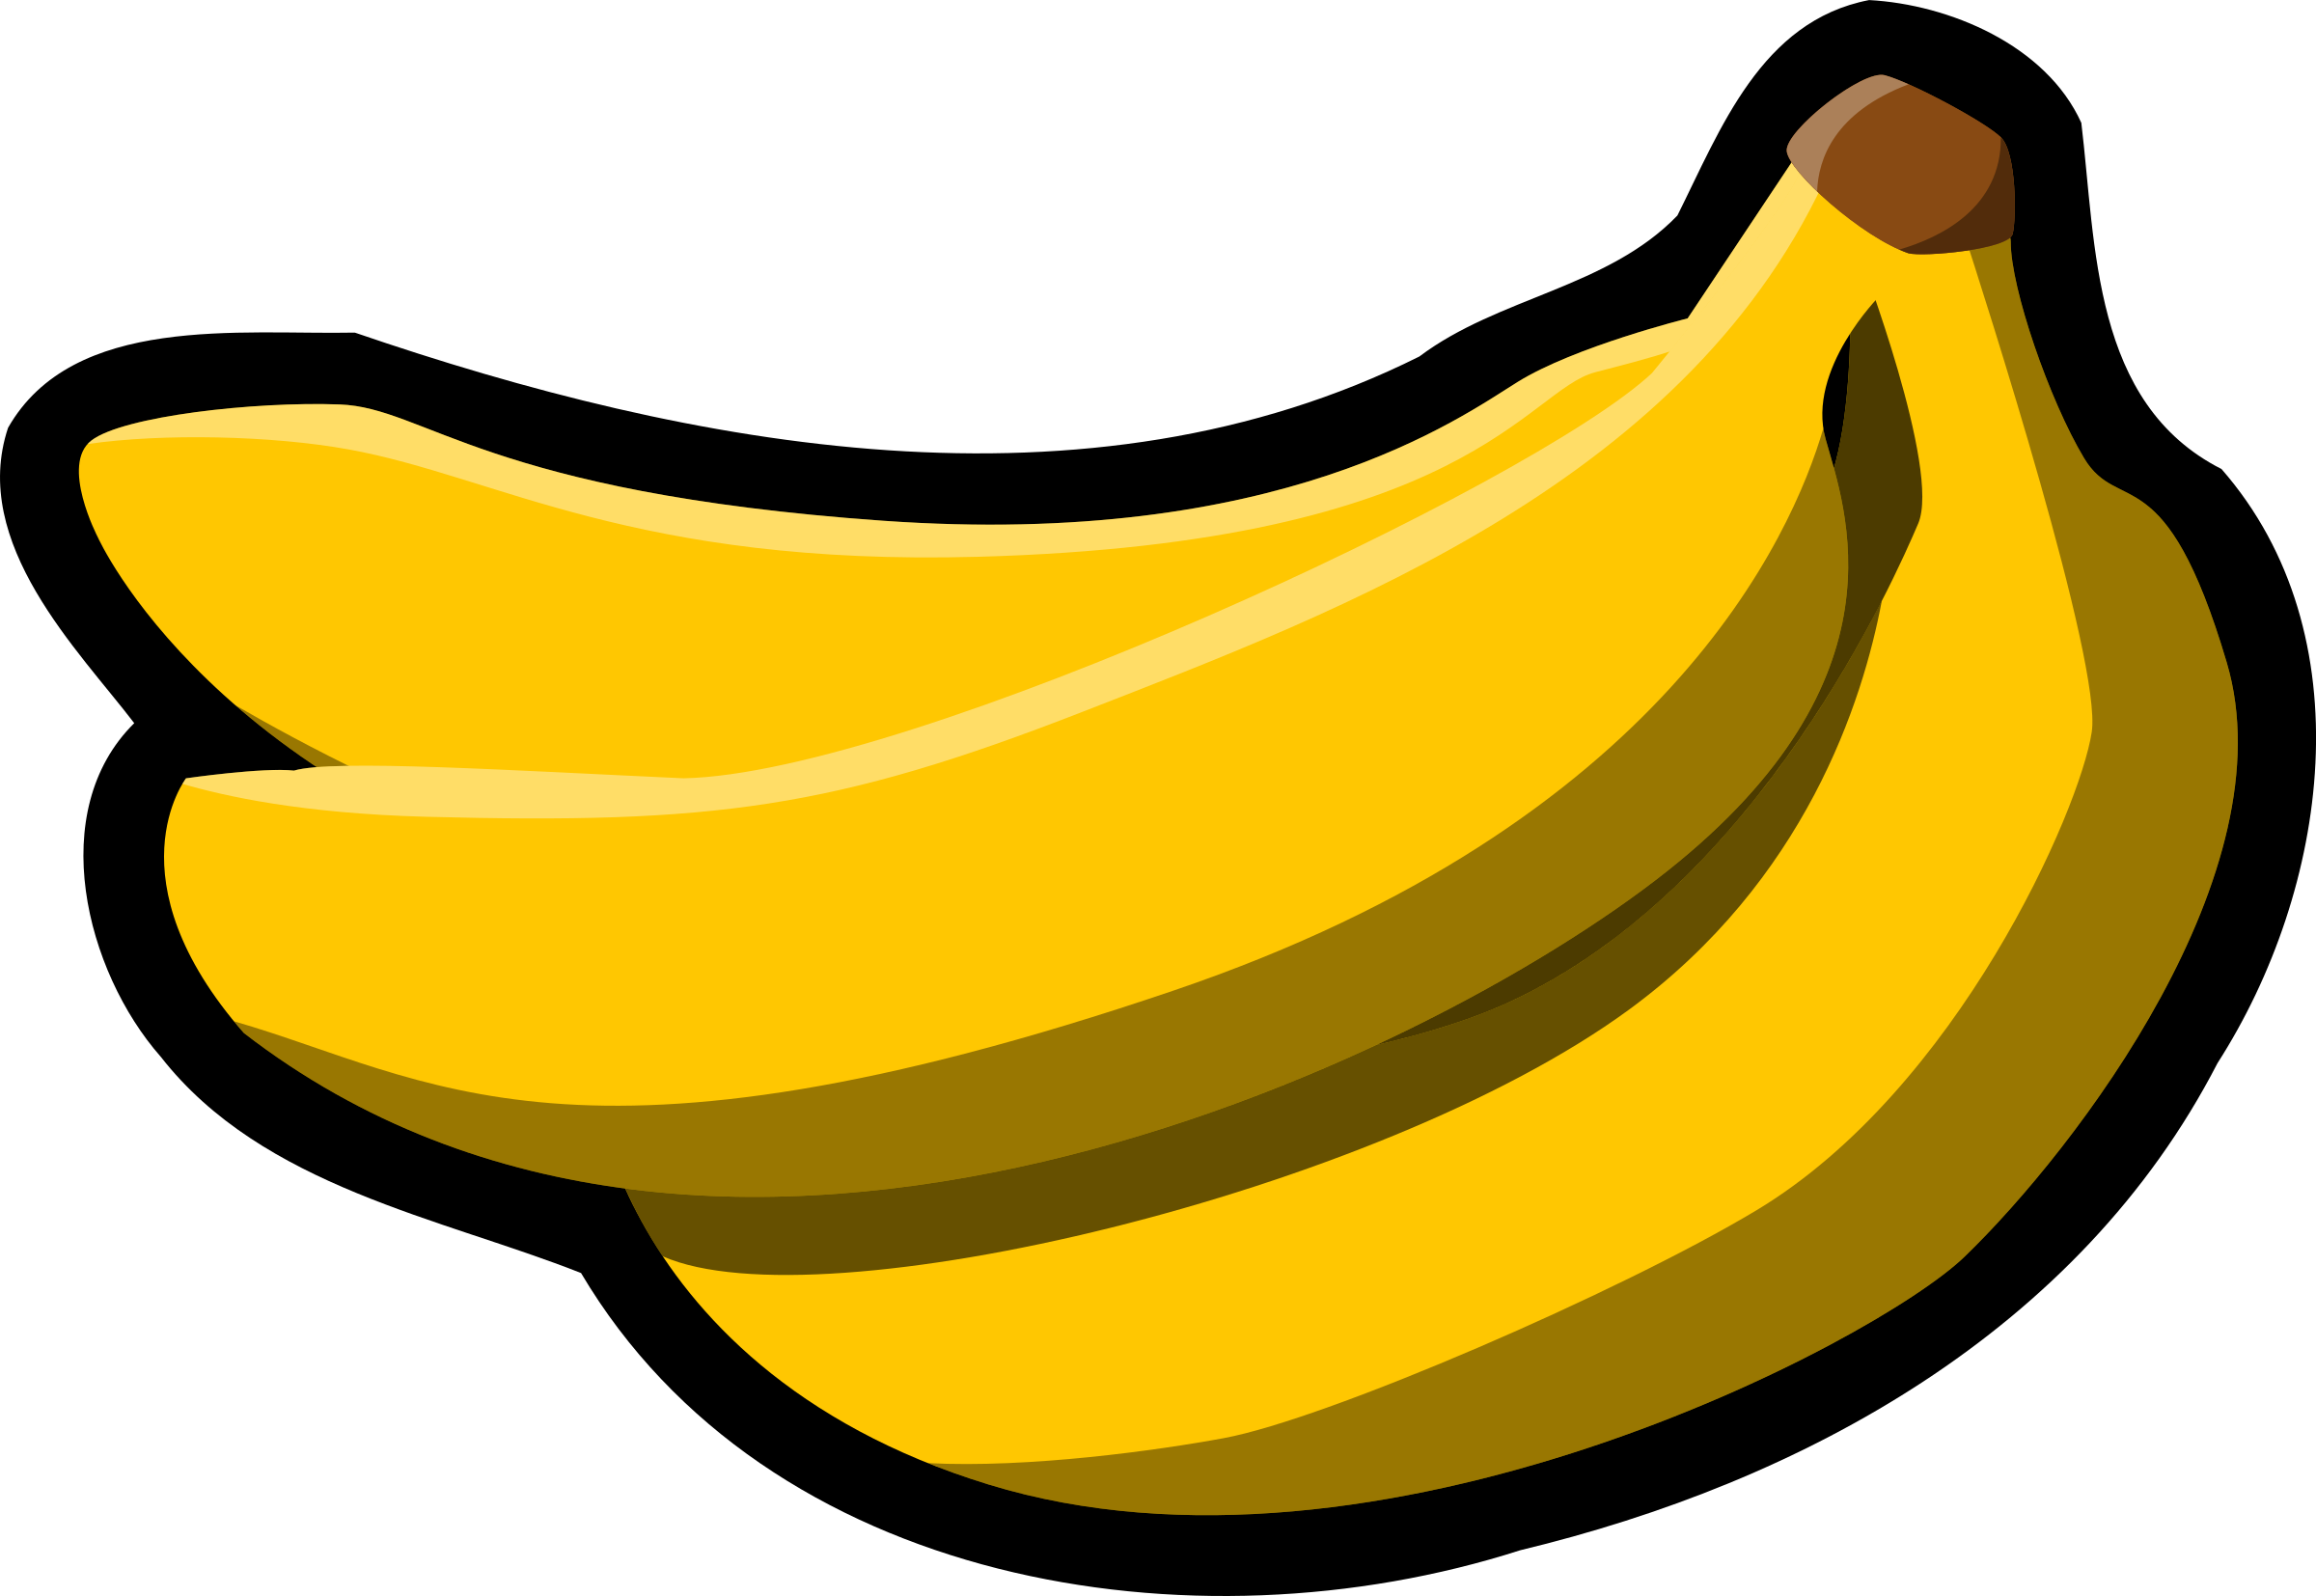 Banana Transparent PNG Downloads - FreeIconsPNG